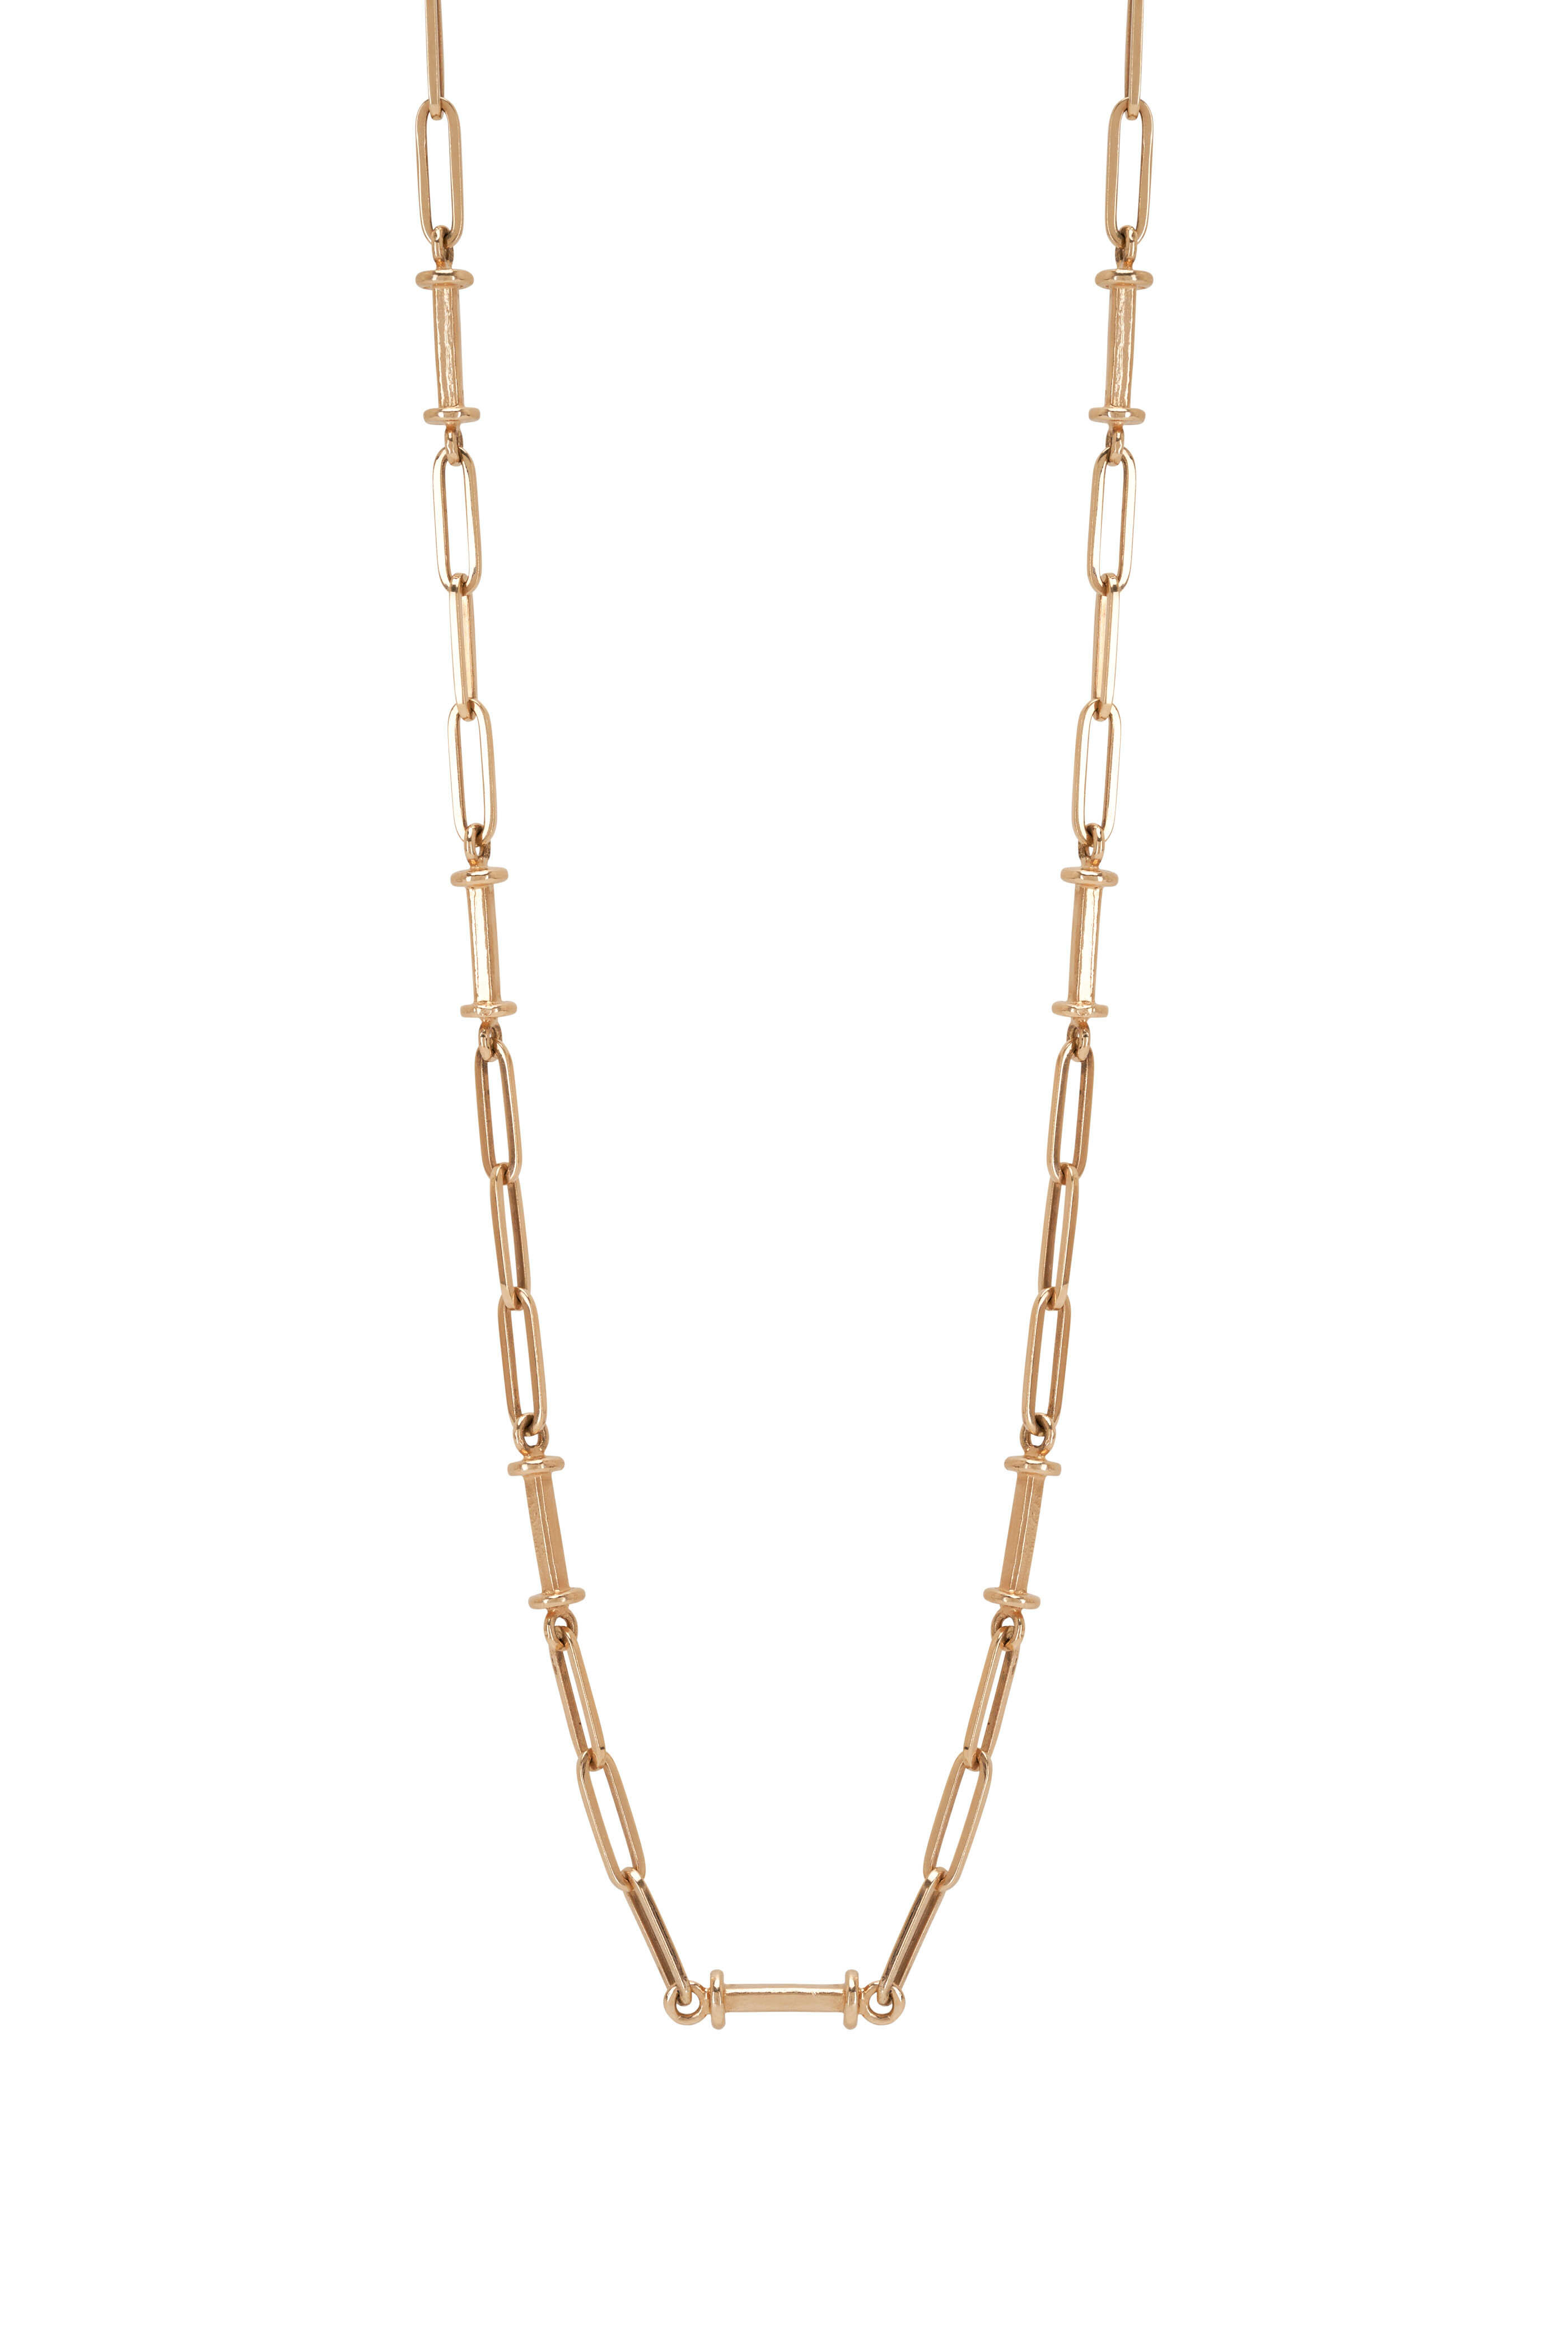  BSWAJIOJIO Layered Gold Necklaces Chain Necklace Gold Necklace  Toggle Clasp Layering Necklaces for Women Link (A, One Size): Clothing,  Shoes & Jewelry